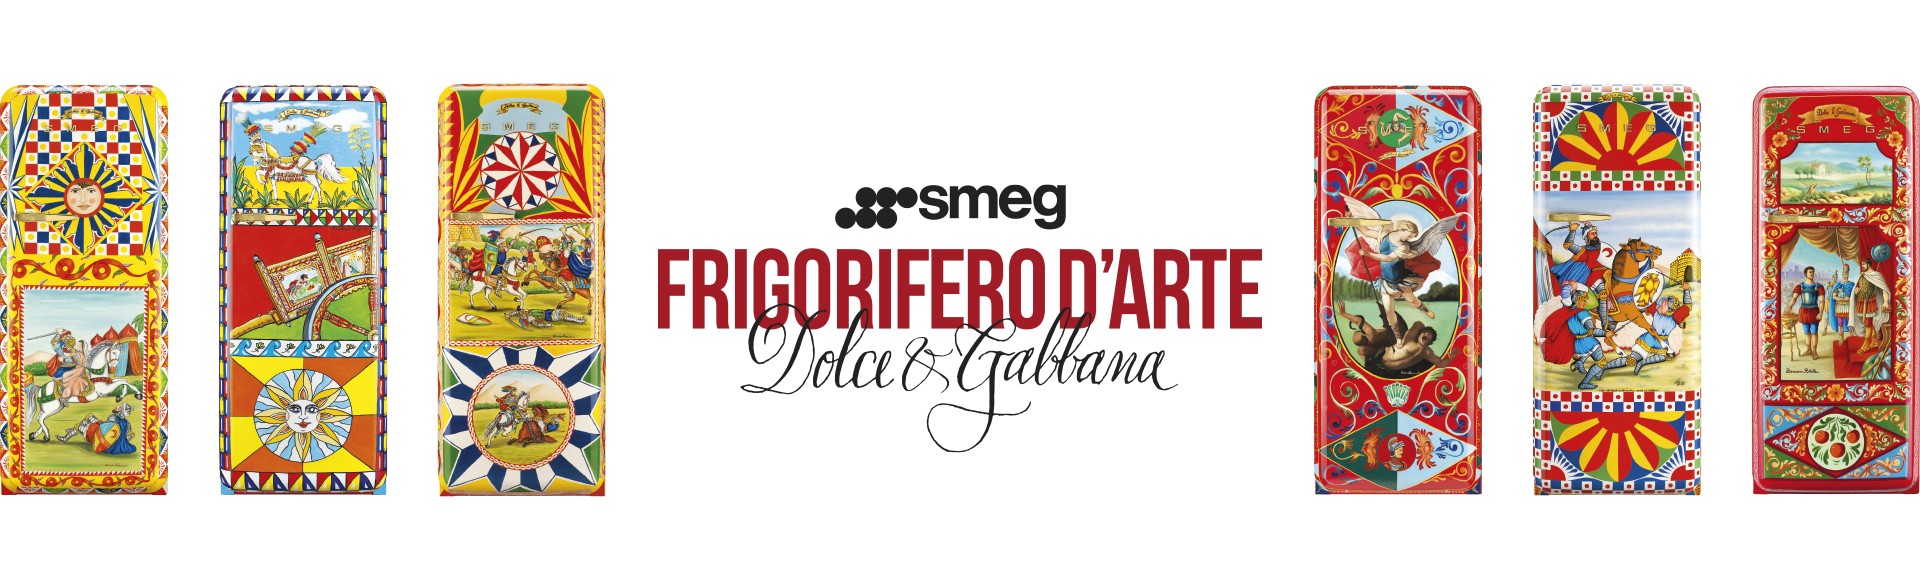 Refrigerator of Art Smeg and Dolce&Gabbana - Special projects - Refrigerator  of art